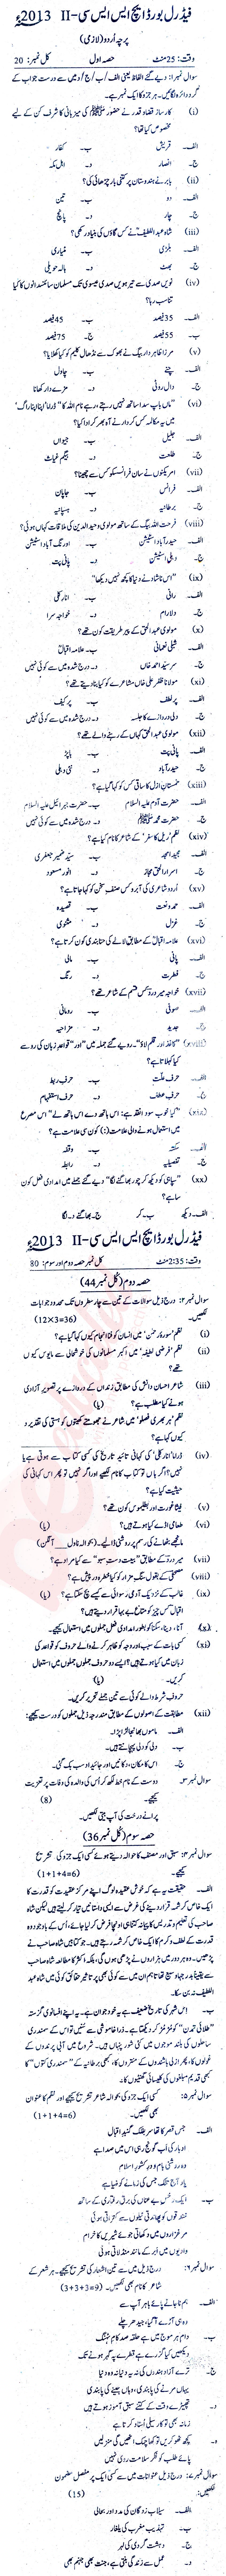 Urdu 12th class Past Paper Group 1 Federal BISE  2013